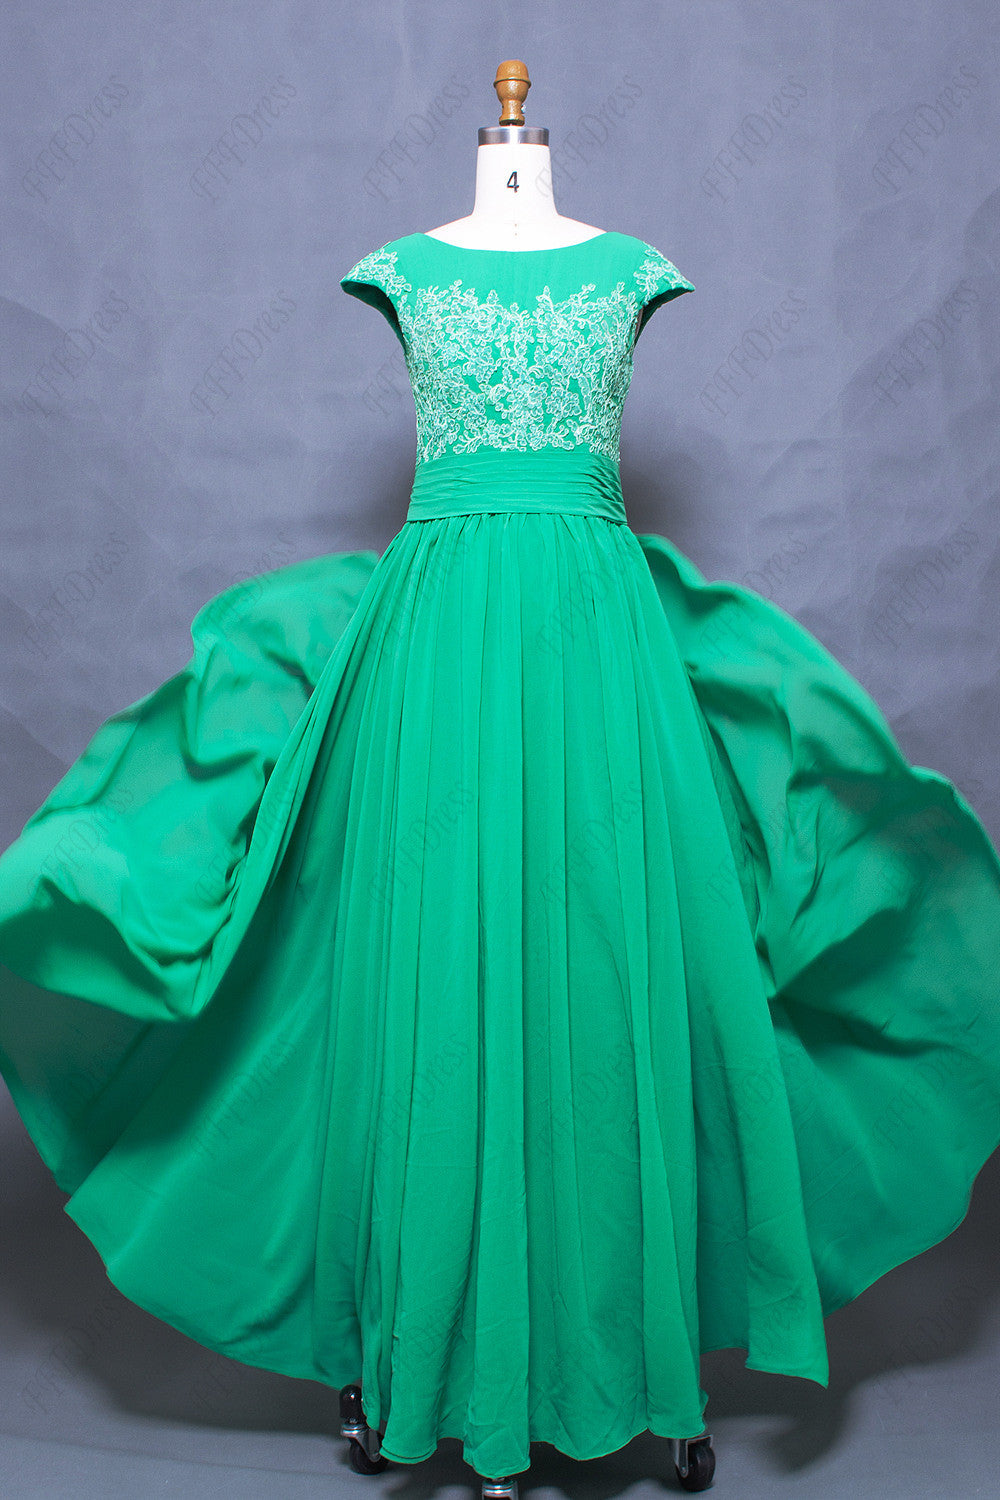 Green modest prom dresses long with cao sleeves